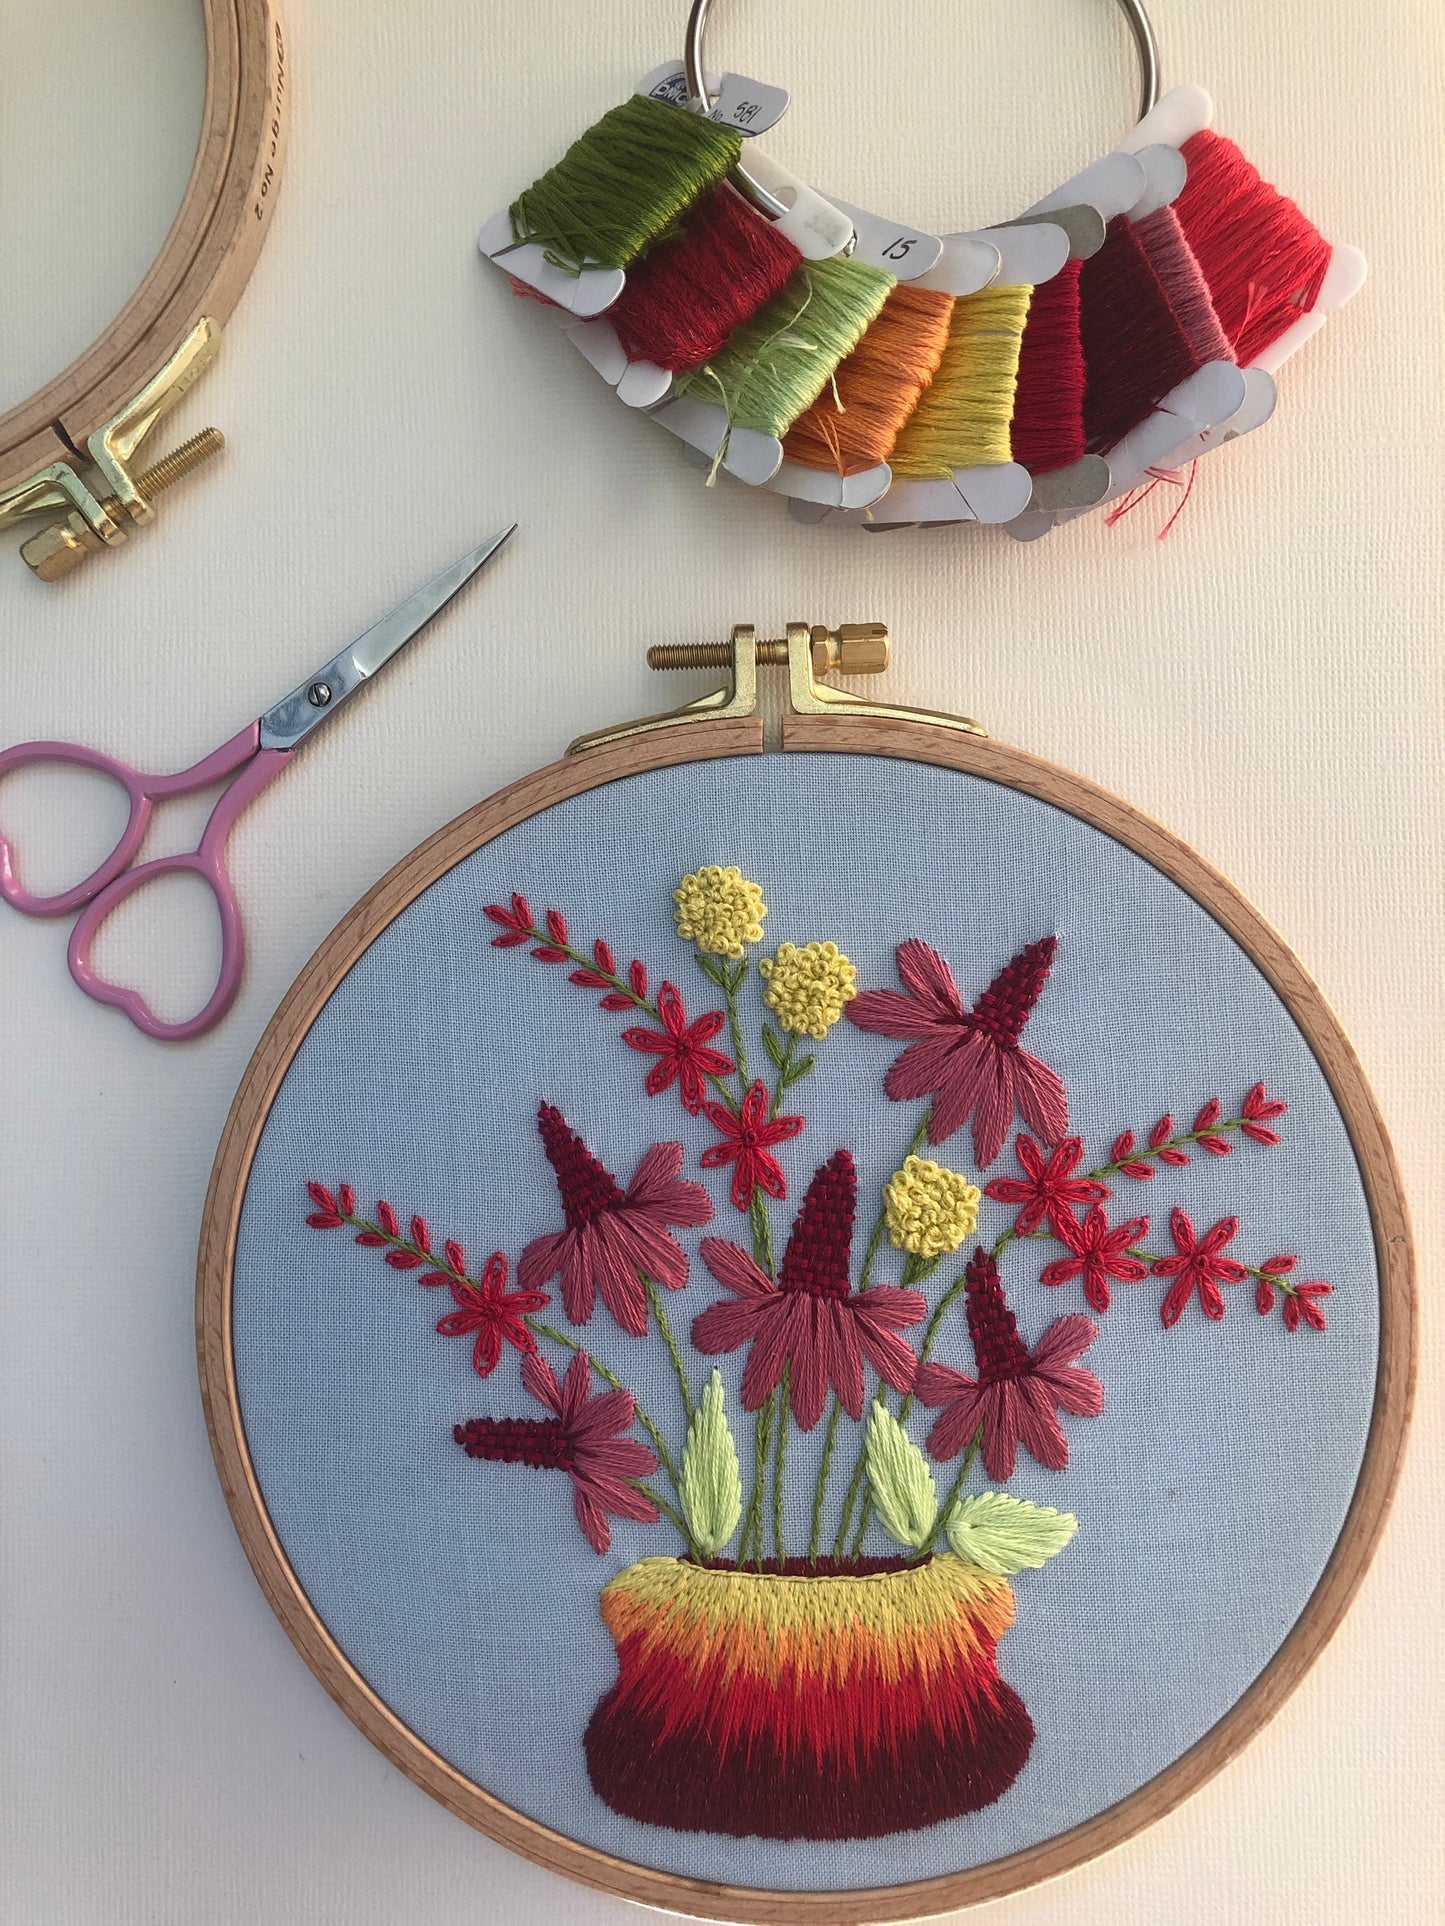 Summer Flowers - Hand Embroidery Pattern PDF